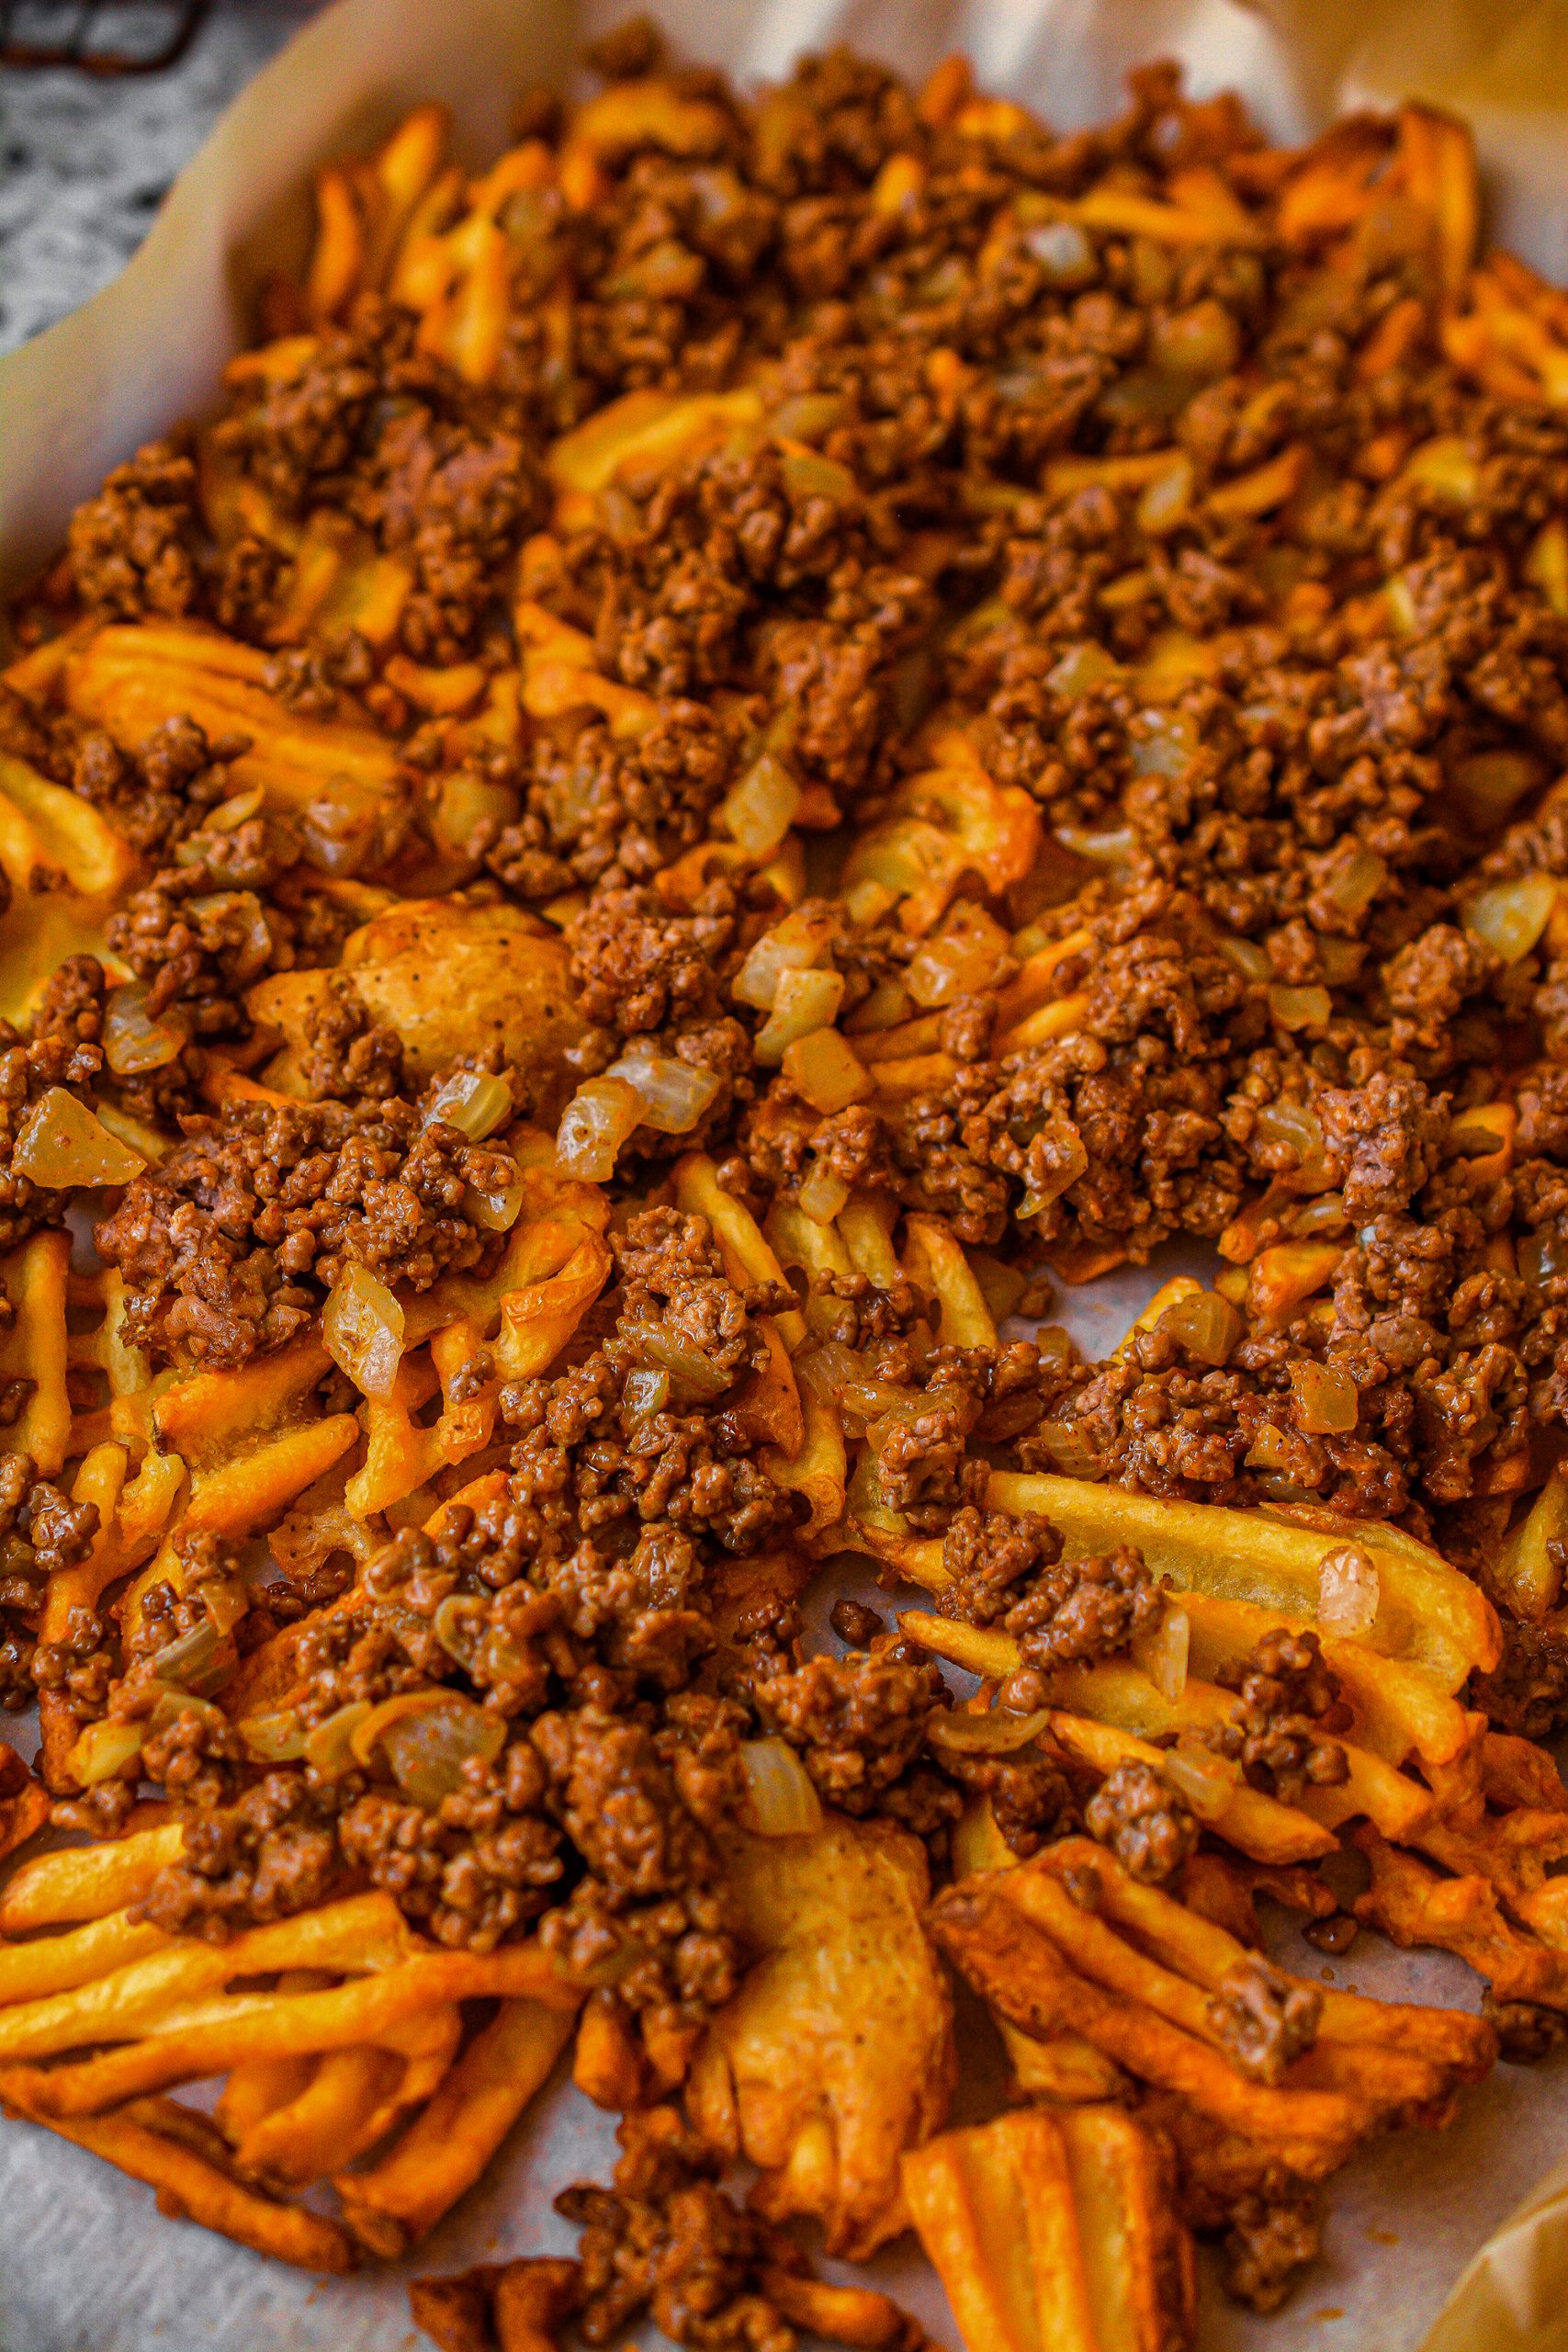 Top the fries with the beef mixture.